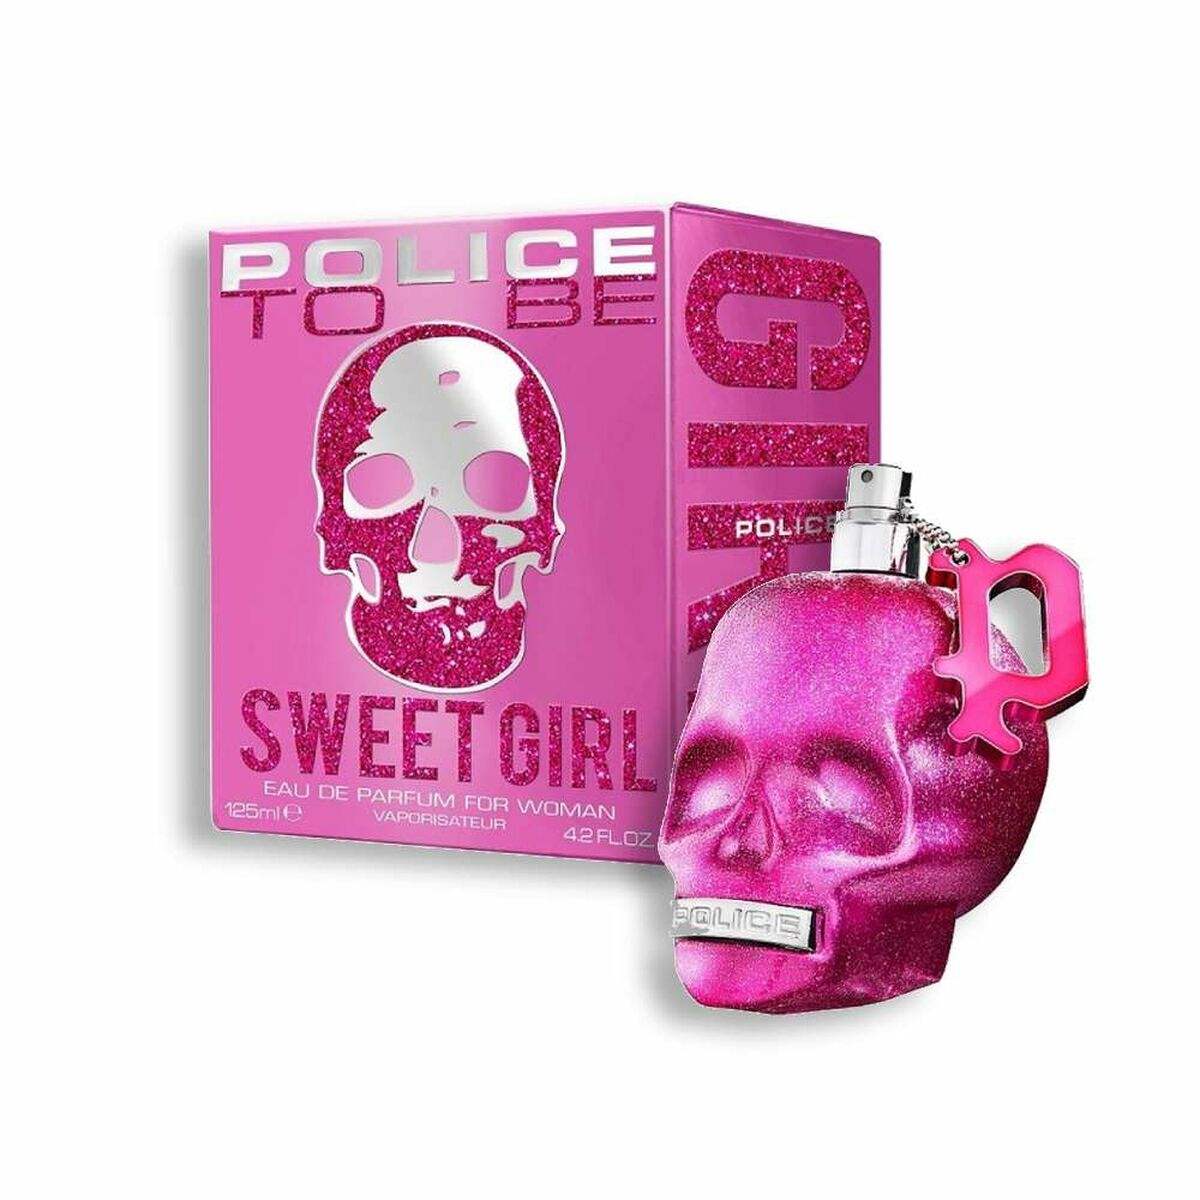 Parfum Femme To Be Sweet Girl Police To Be Sweet Girl EDP 125 ml - Police - Jardin D'Eyden - jardindeyden.fr